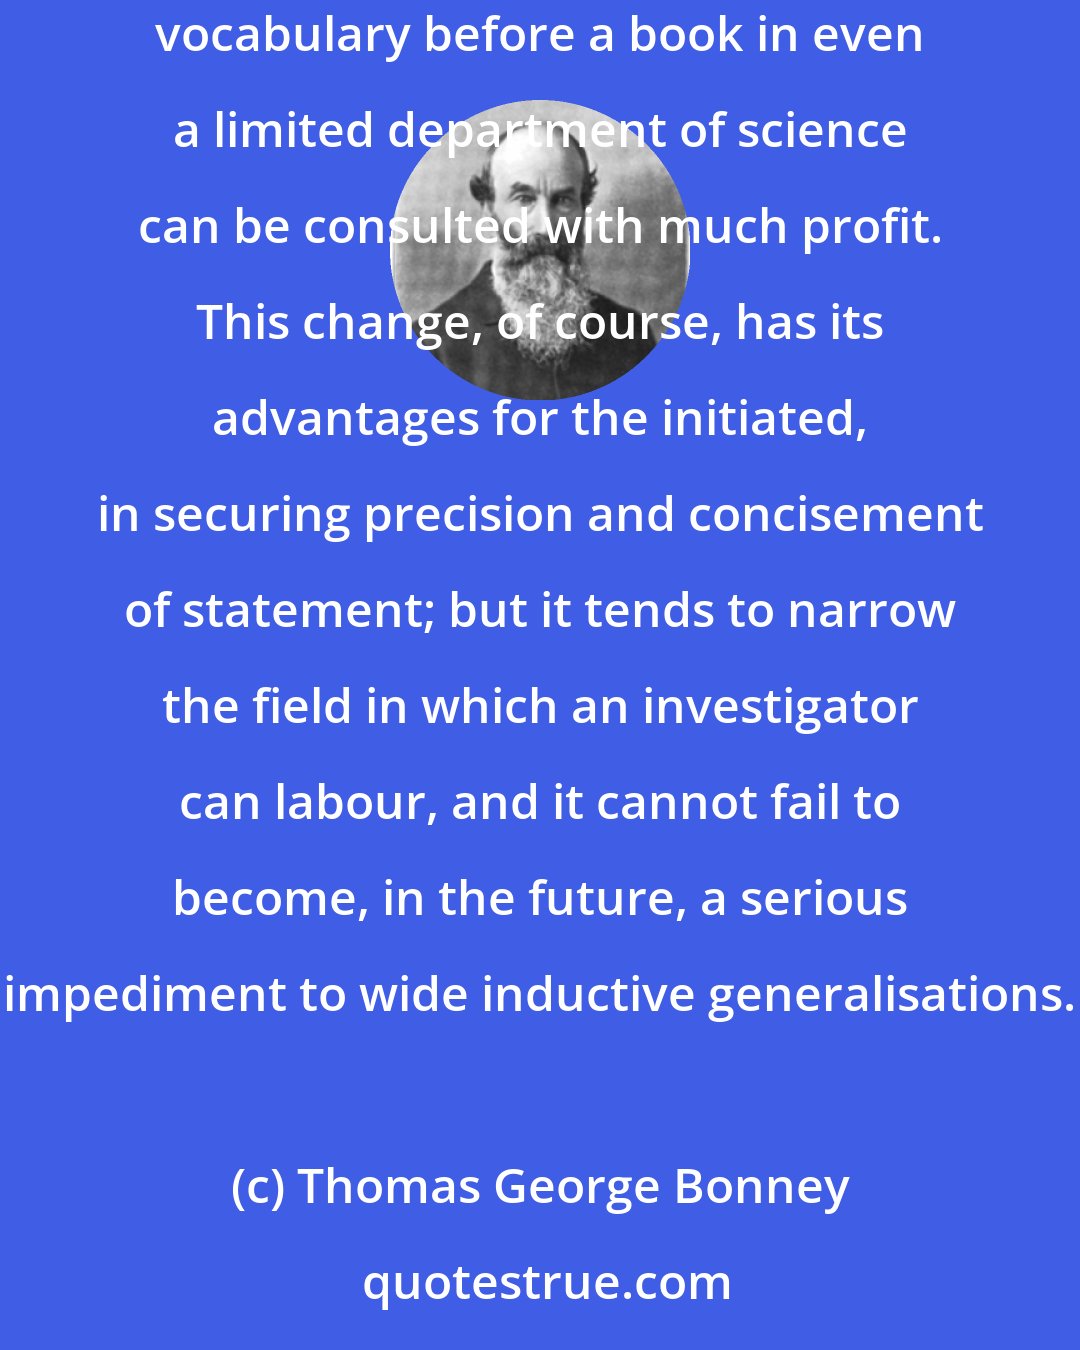 Thomas George Bonney: The increasing technicality of the terminology employed is also a serious difficulty. It has become necessary to learn an extensive vocabulary before a book in even a limited department of science can be consulted with much profit. This change, of course, has its advantages for the initiated, in securing precision and concisement of statement; but it tends to narrow the field in which an investigator can labour, and it cannot fail to become, in the future, a serious impediment to wide inductive generalisations.